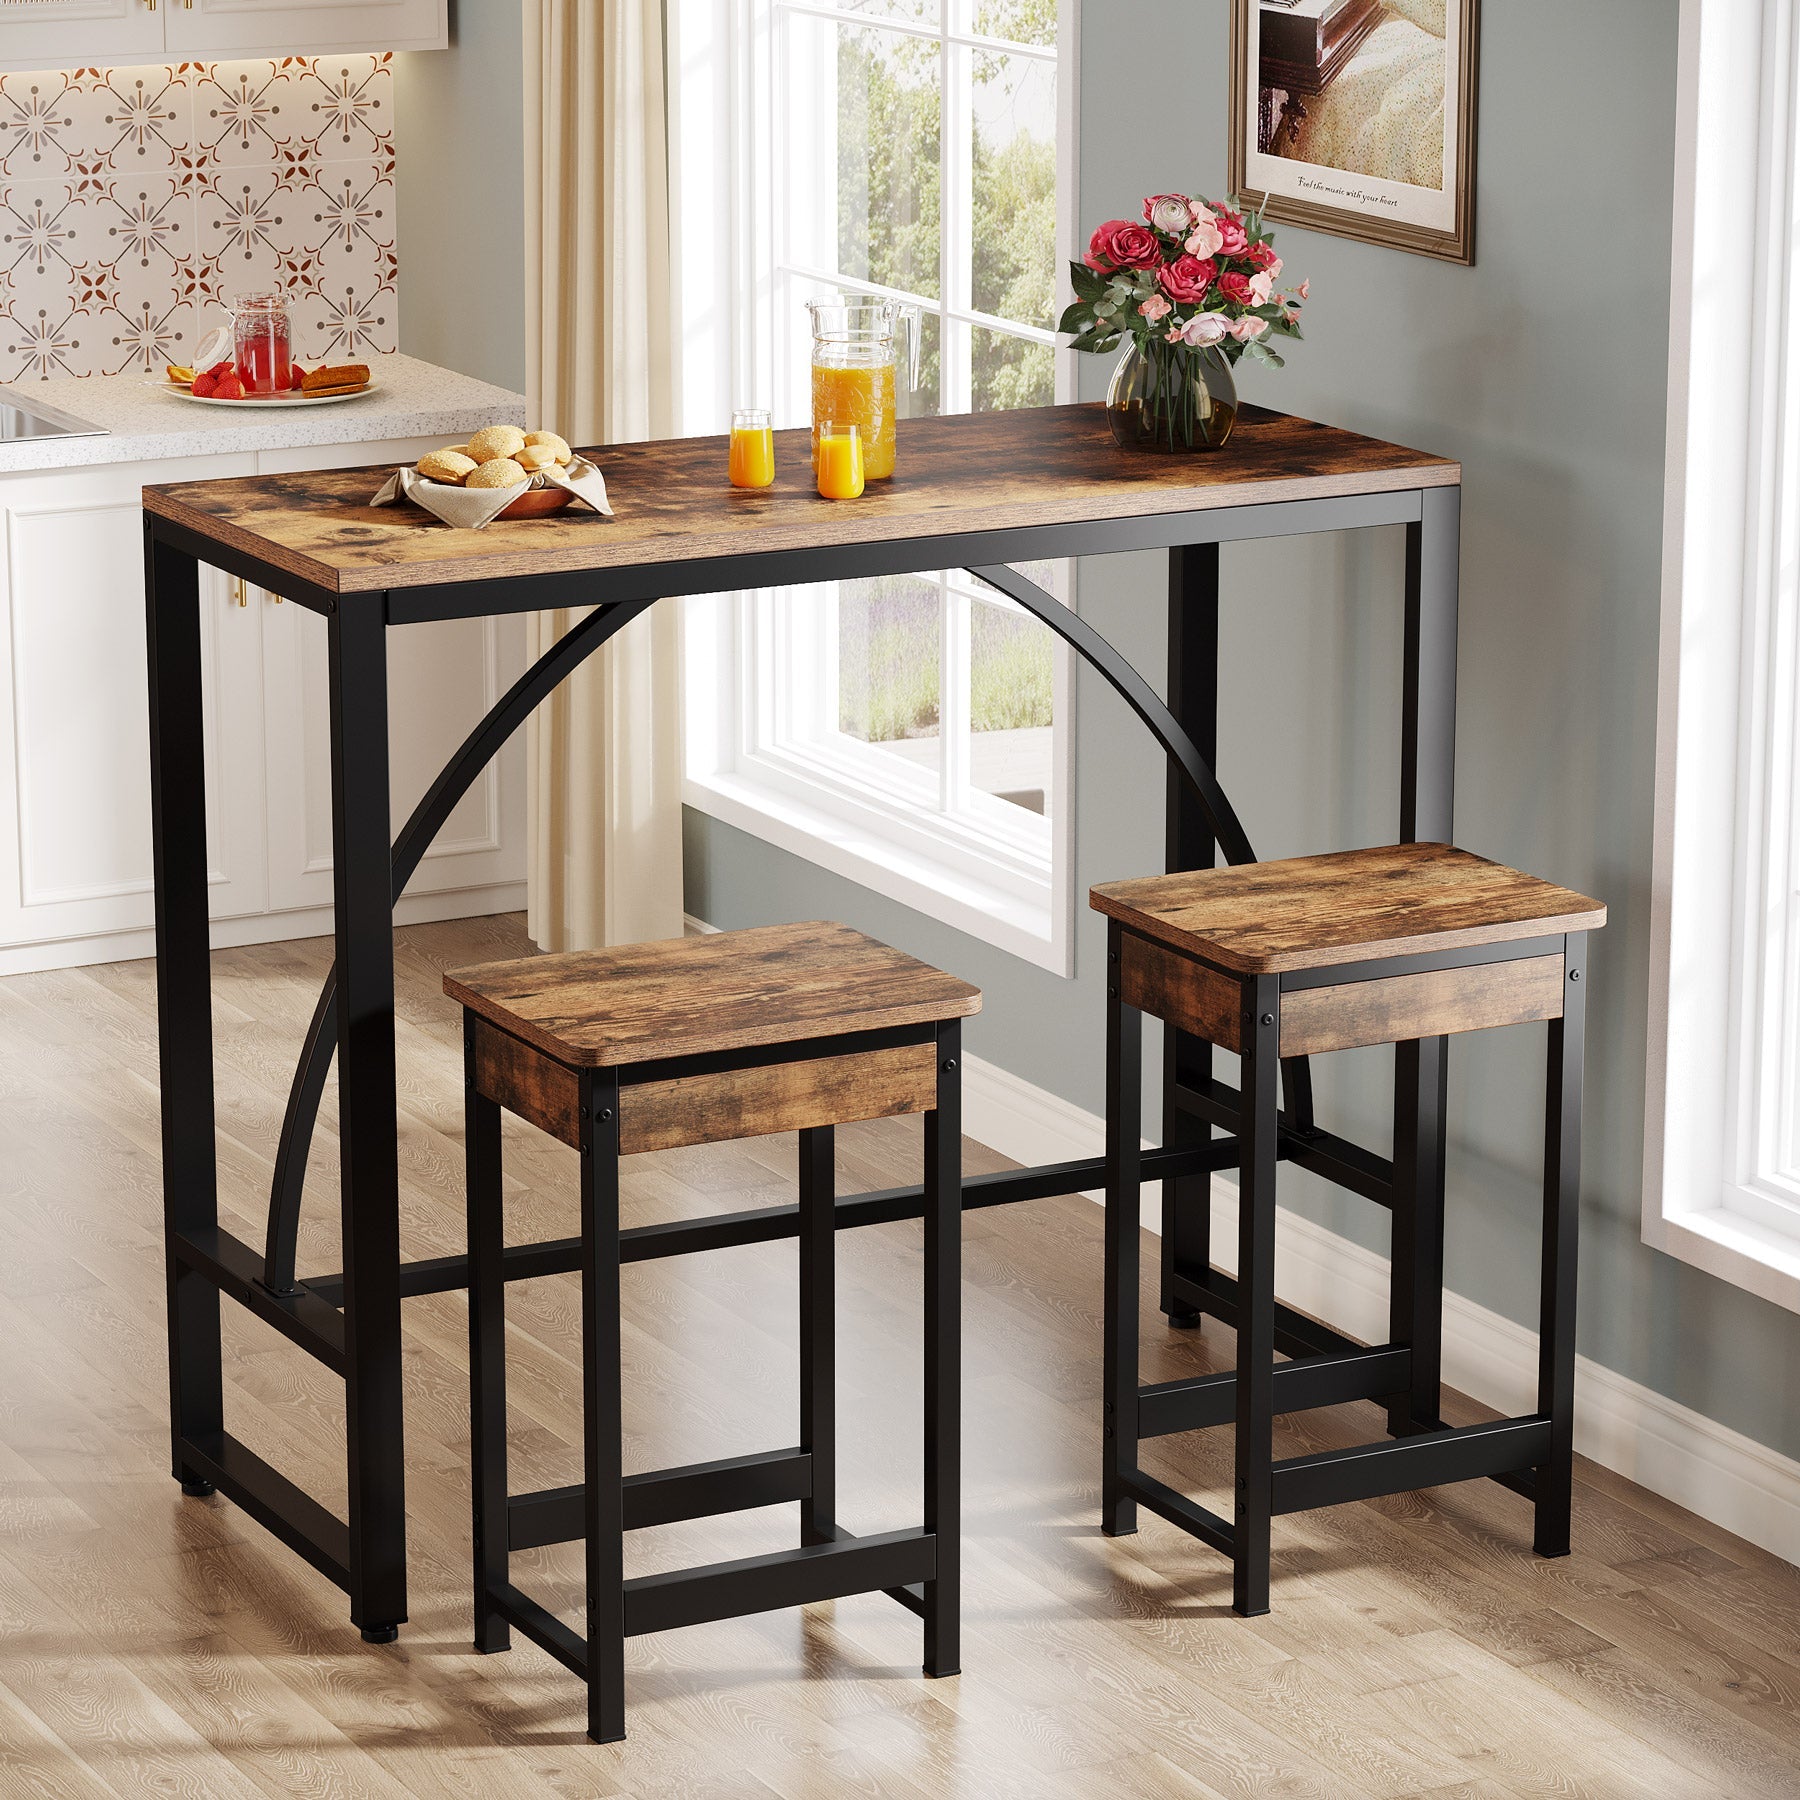 3-Piece Bar Table Set, 43.7-Inch Dining Table with 2 Stools